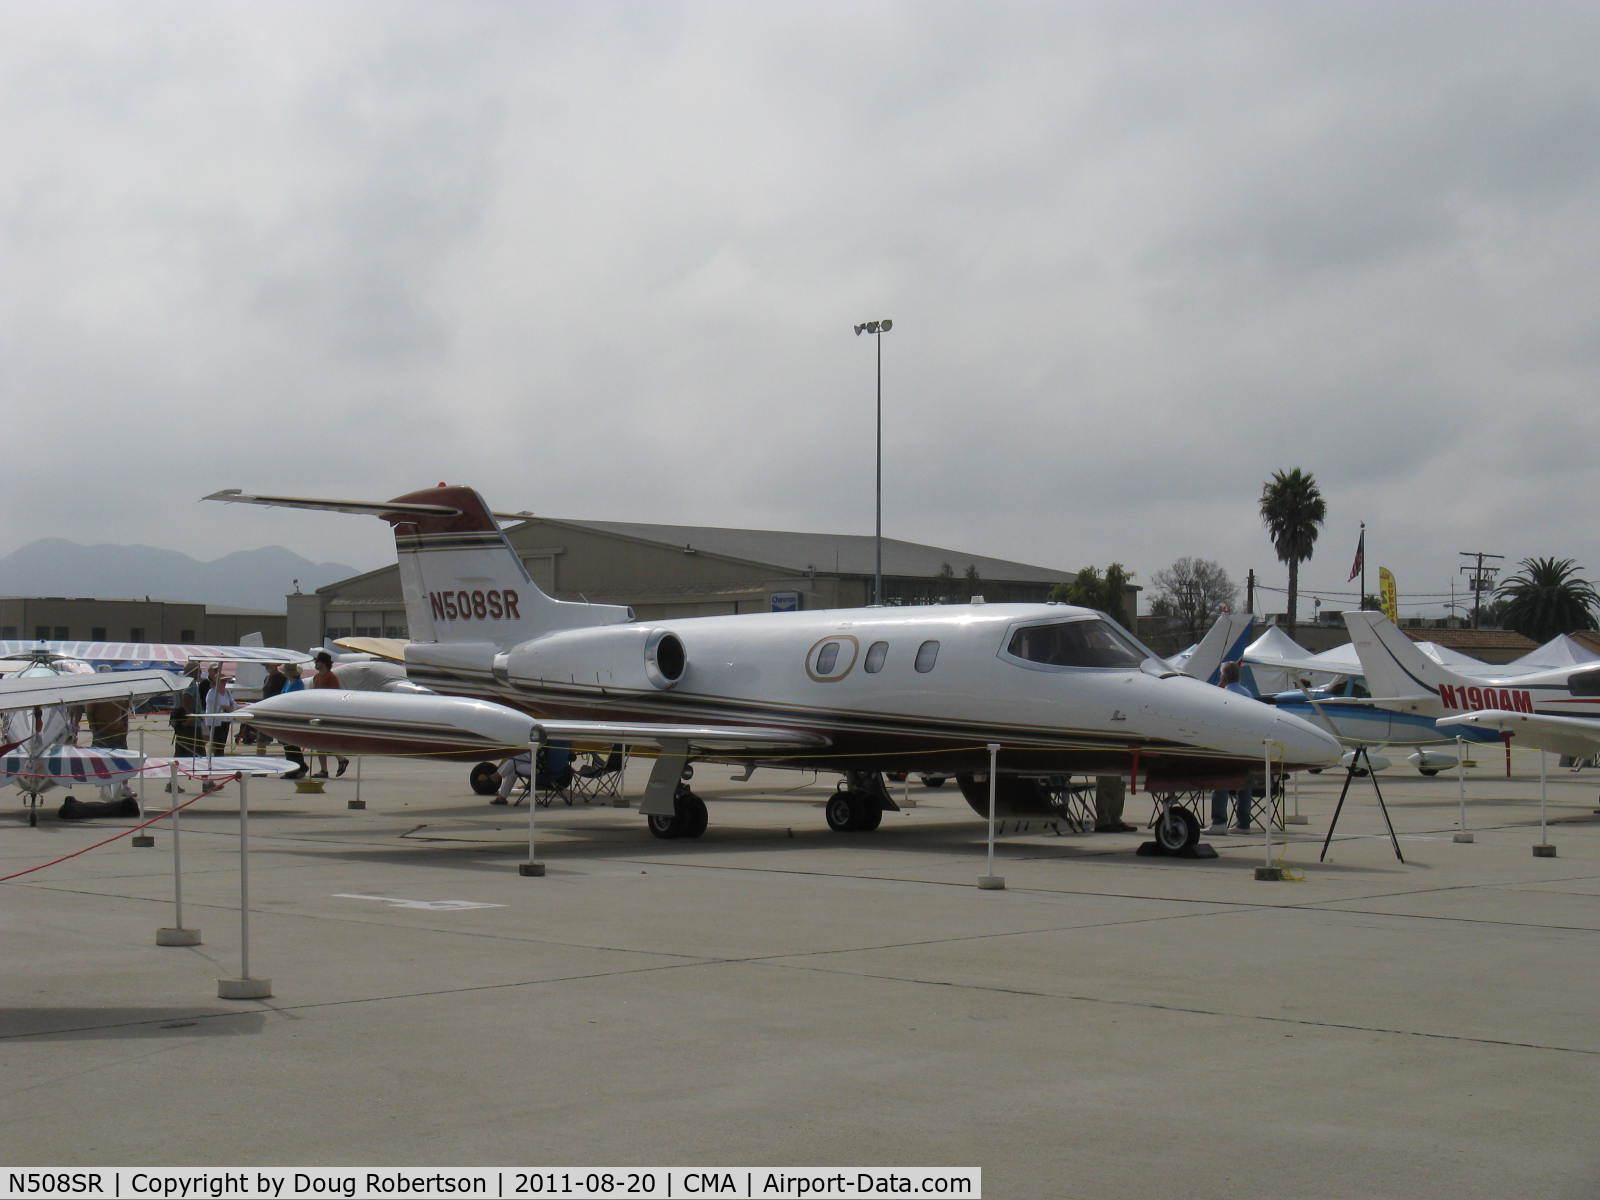 N508SR, 1977 Gates Learjet 24E C/N 347, 1977 GATES LEAR JET 24E, two General Electric CJ610-8A Turbojets 2,950 lb st each, Century III wing, Ceiling 51,000 feet (a record for FAA certification in class at the time). FOR SALE